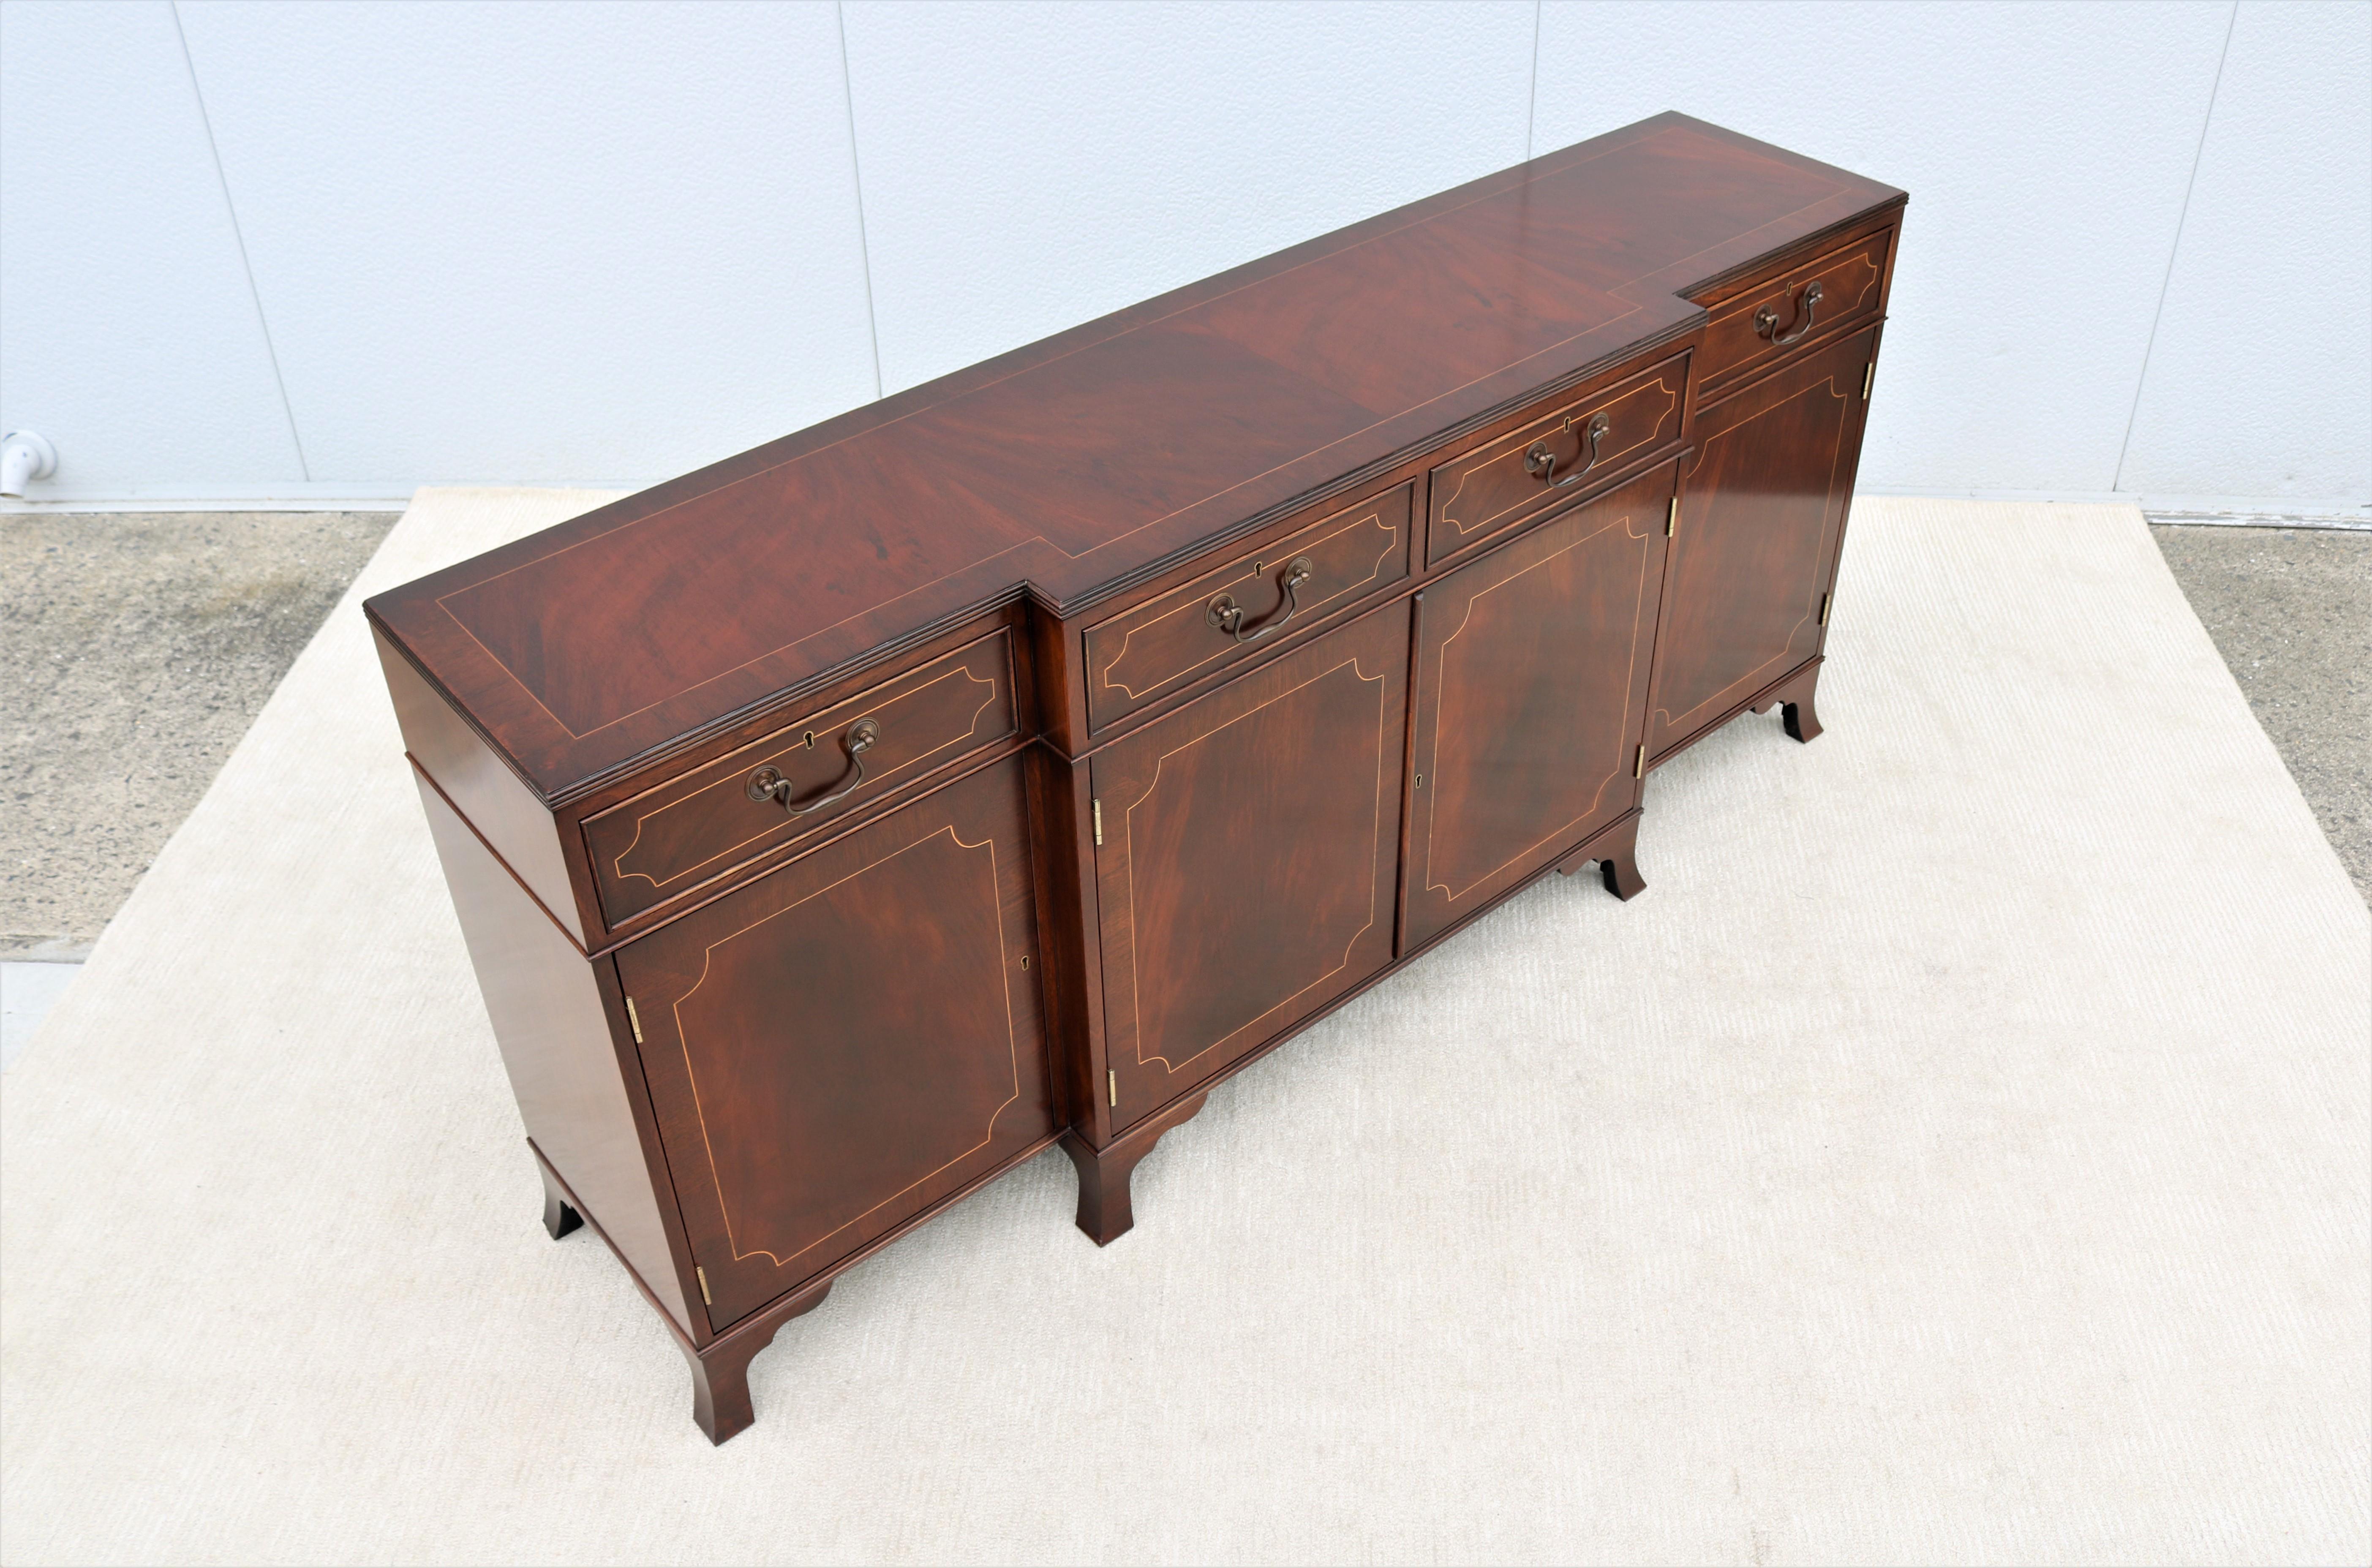 20th Century Vintage Traditional Trosby Furniture English Sheraton Style Breakfronted Cabinet For Sale